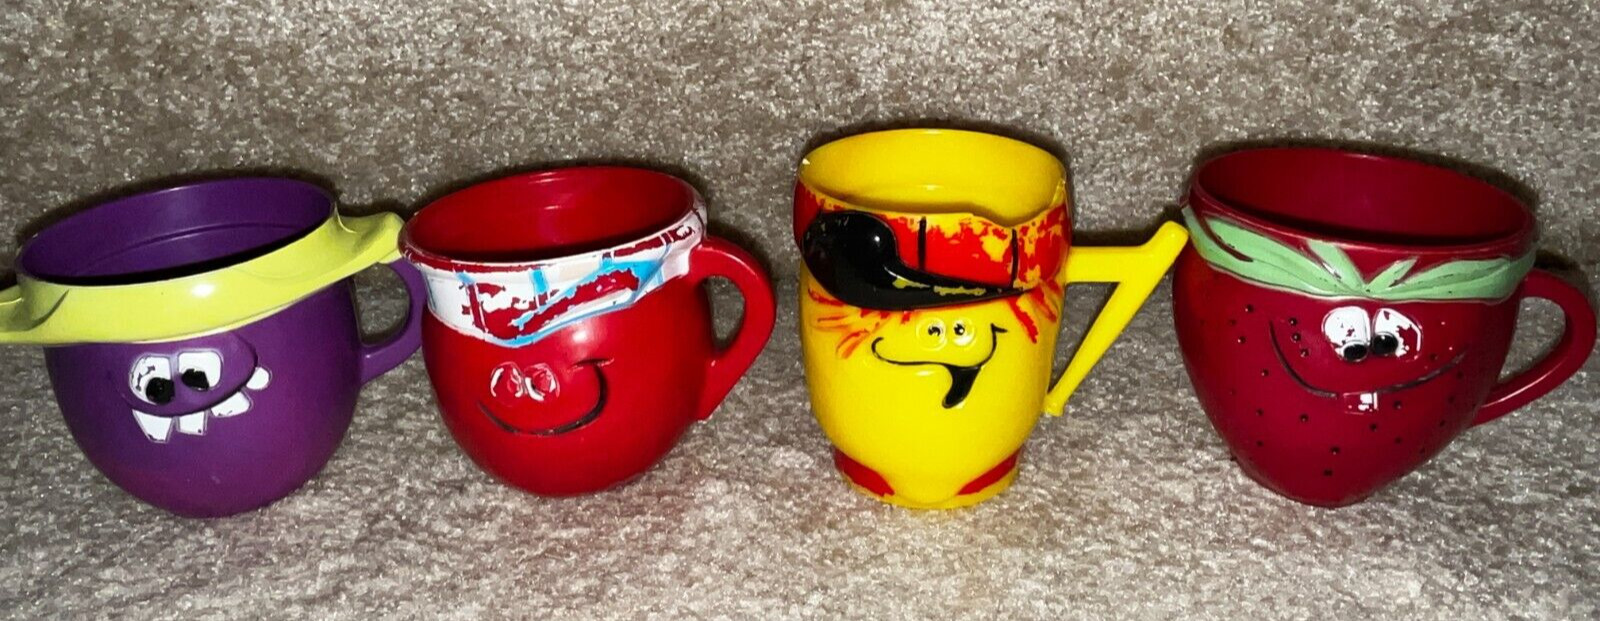 AS IS 4 Vintage Pillsbury Plastic Mugs FUNNY FACES Made in USA